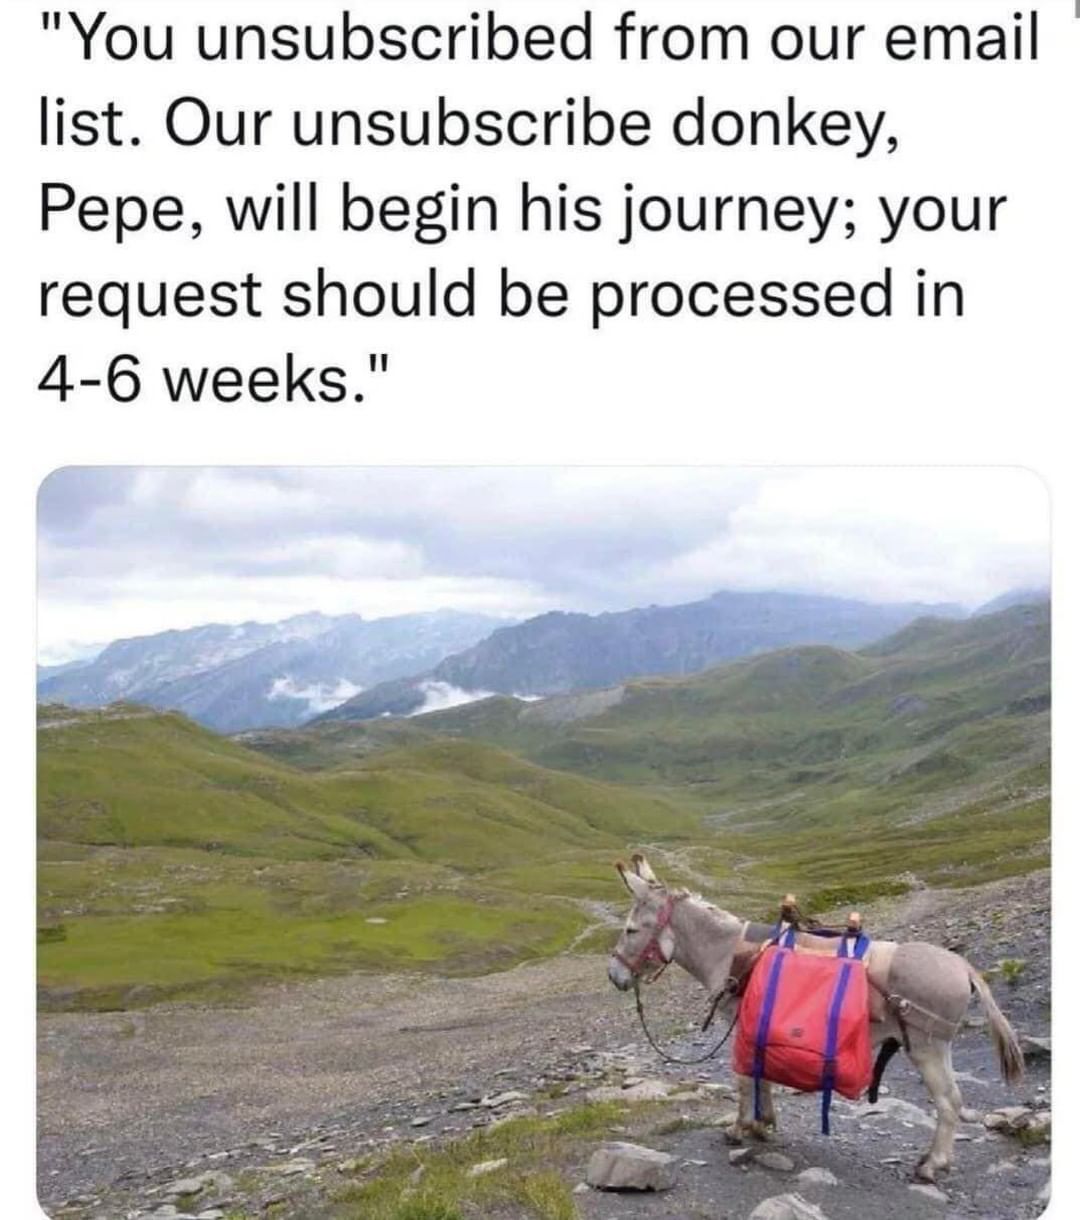 You unsubscribed from our email list. Our unsubscribe donkey, Pepe, will begin his journey; your request should be processed in 4-6 weeks.